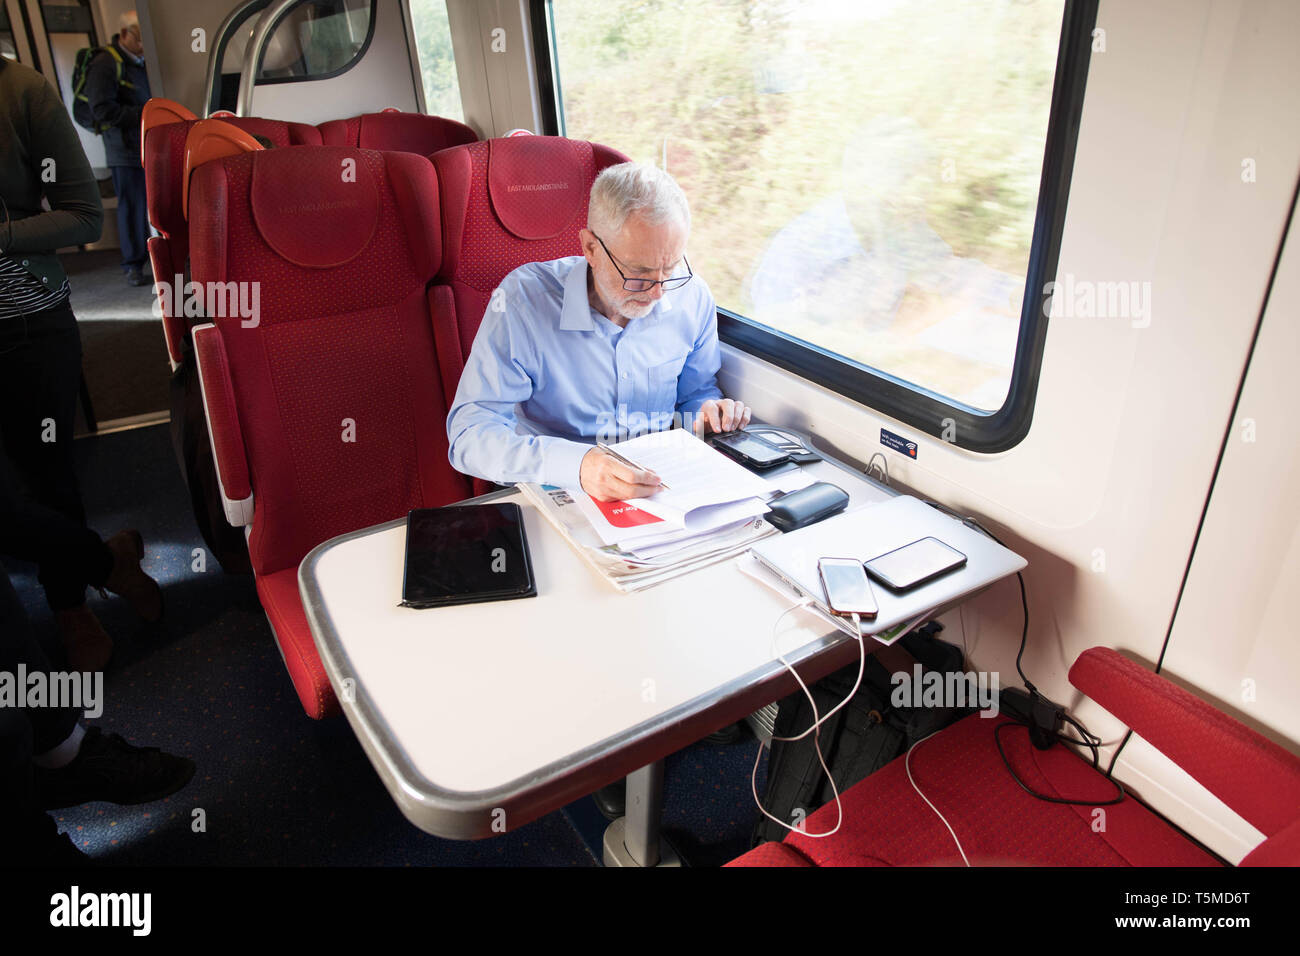 Labour leader, Jeremy Corbyn takes the train back to London after visiting Nottingham where he saw an 'eco bus' run by Nottingham City Transport Ð the cityÕs municipal bus company. Stock Photo